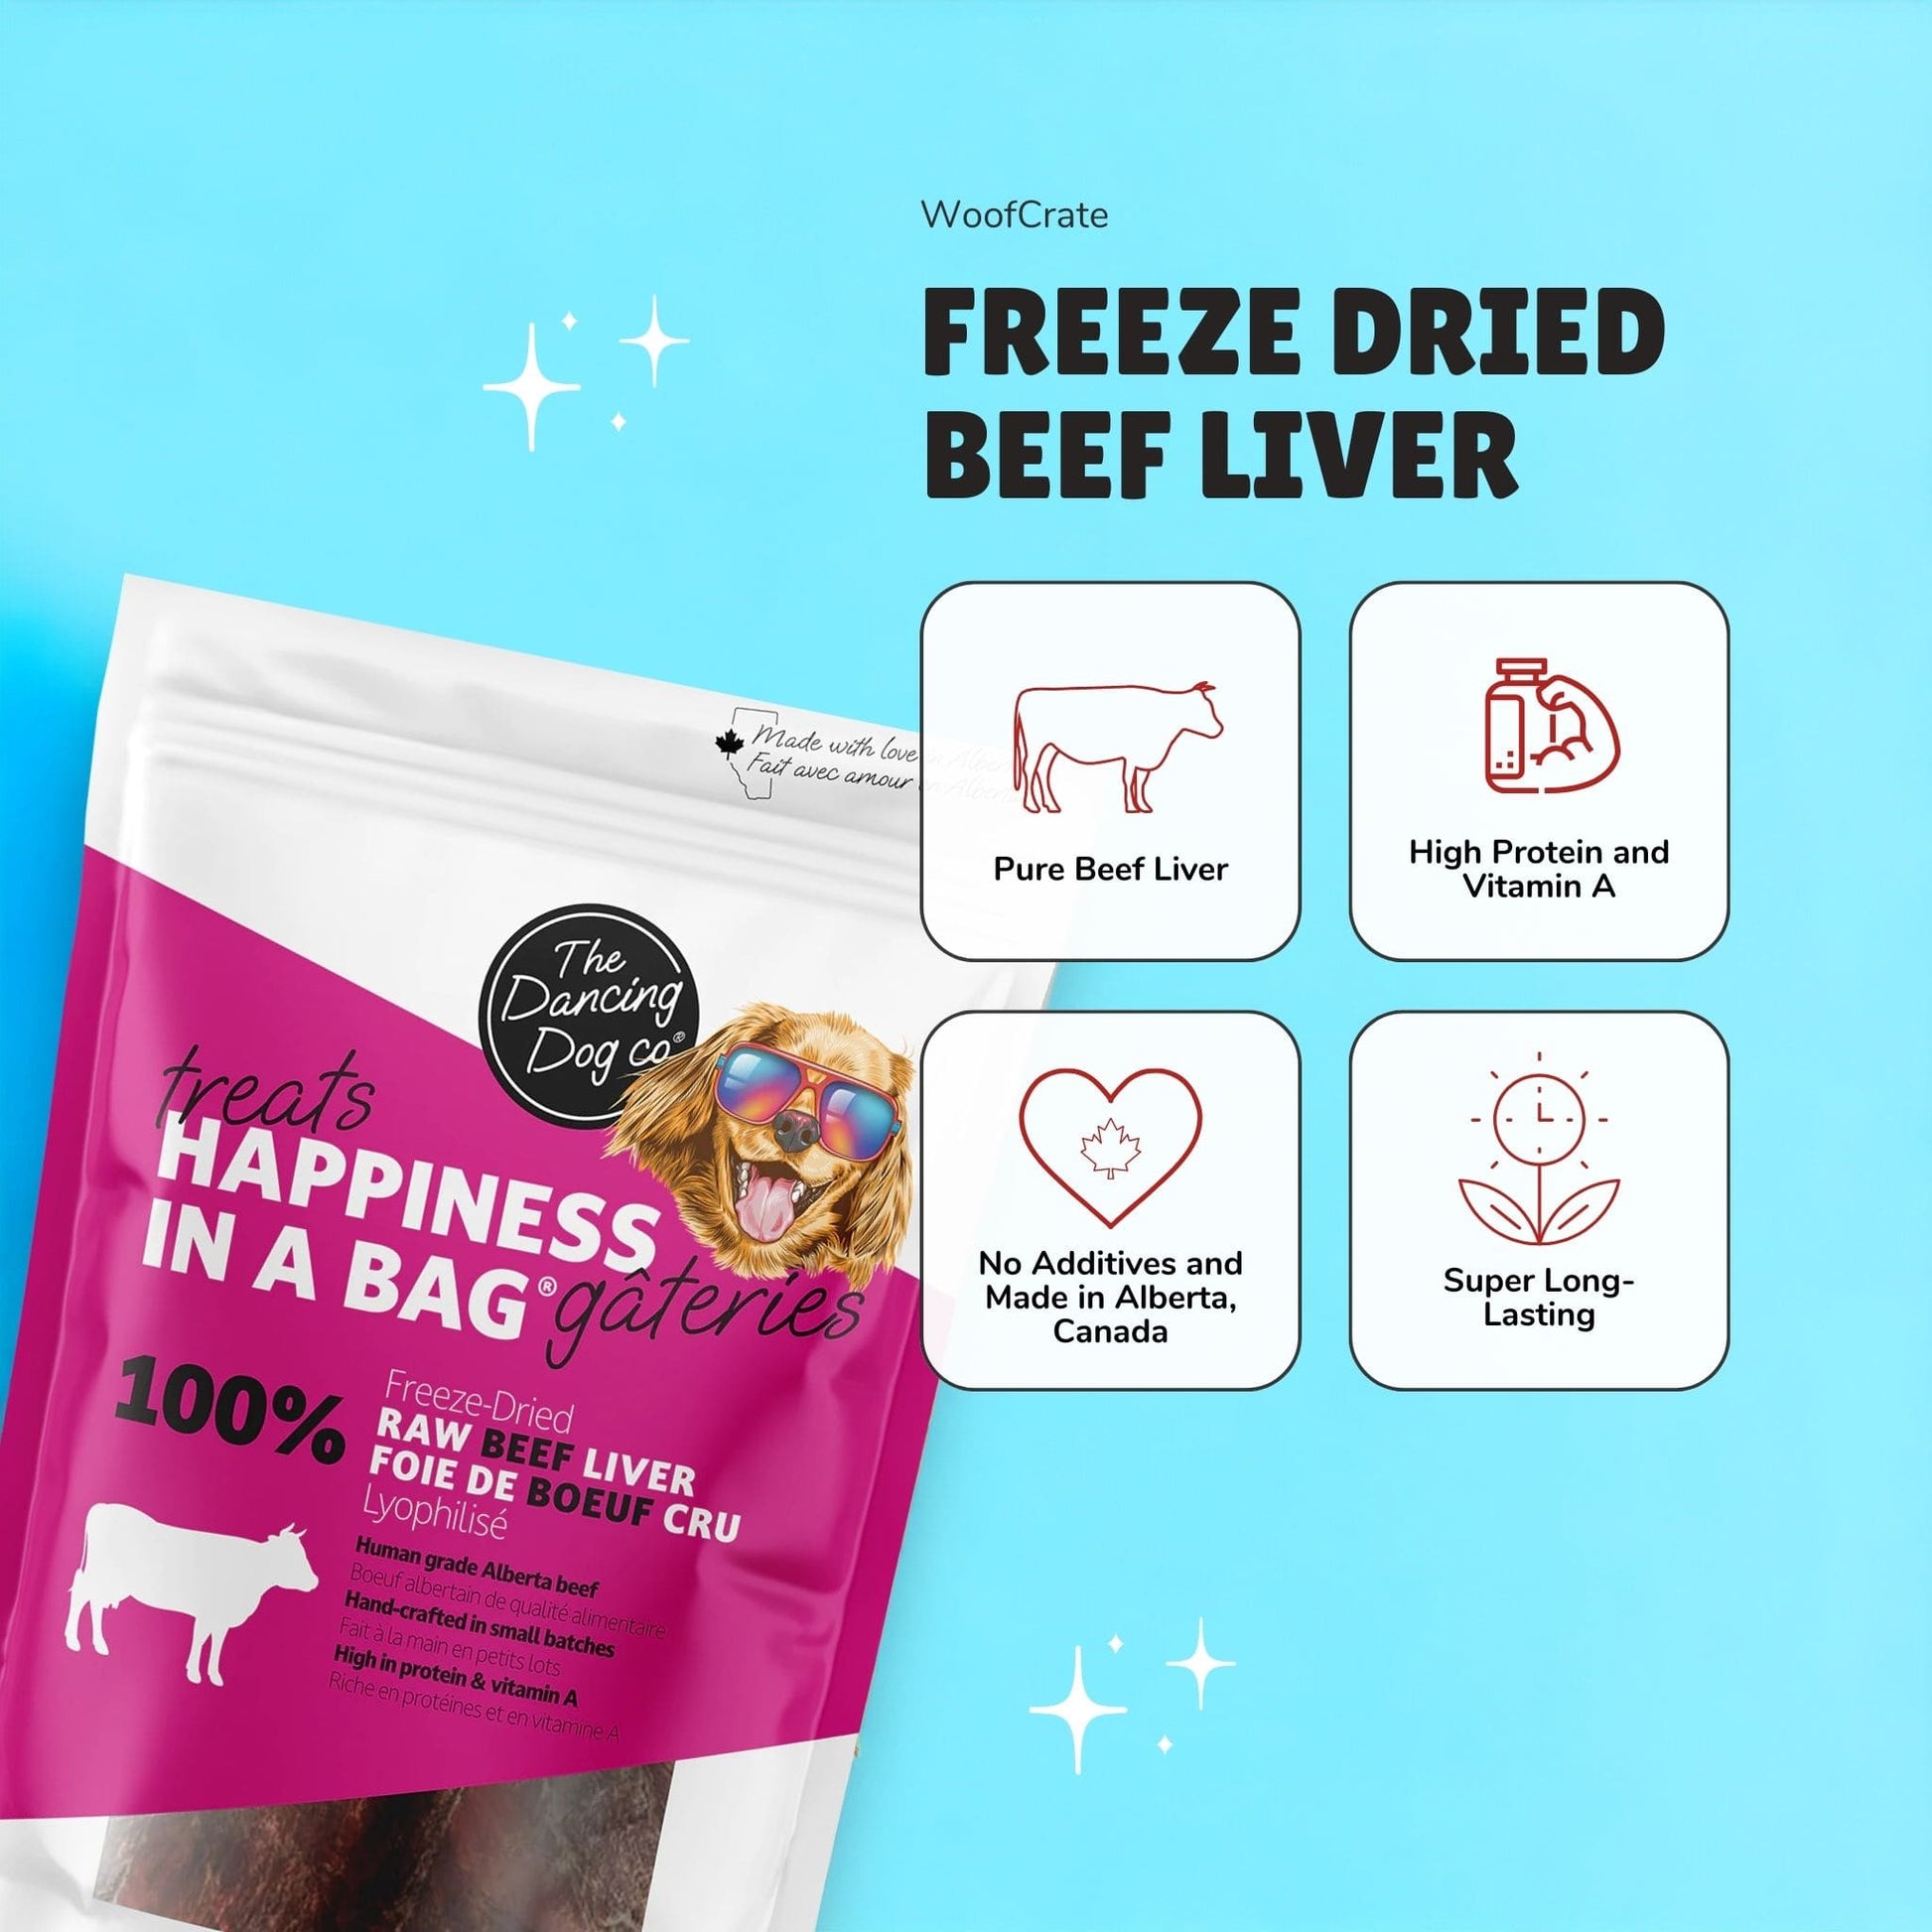 Benefits of freeze dried beef liver for dogs side by side with a bag of beef liver dog treats. The benefits include being high in protein, having no additives, being made in Canada, and are long lasting.